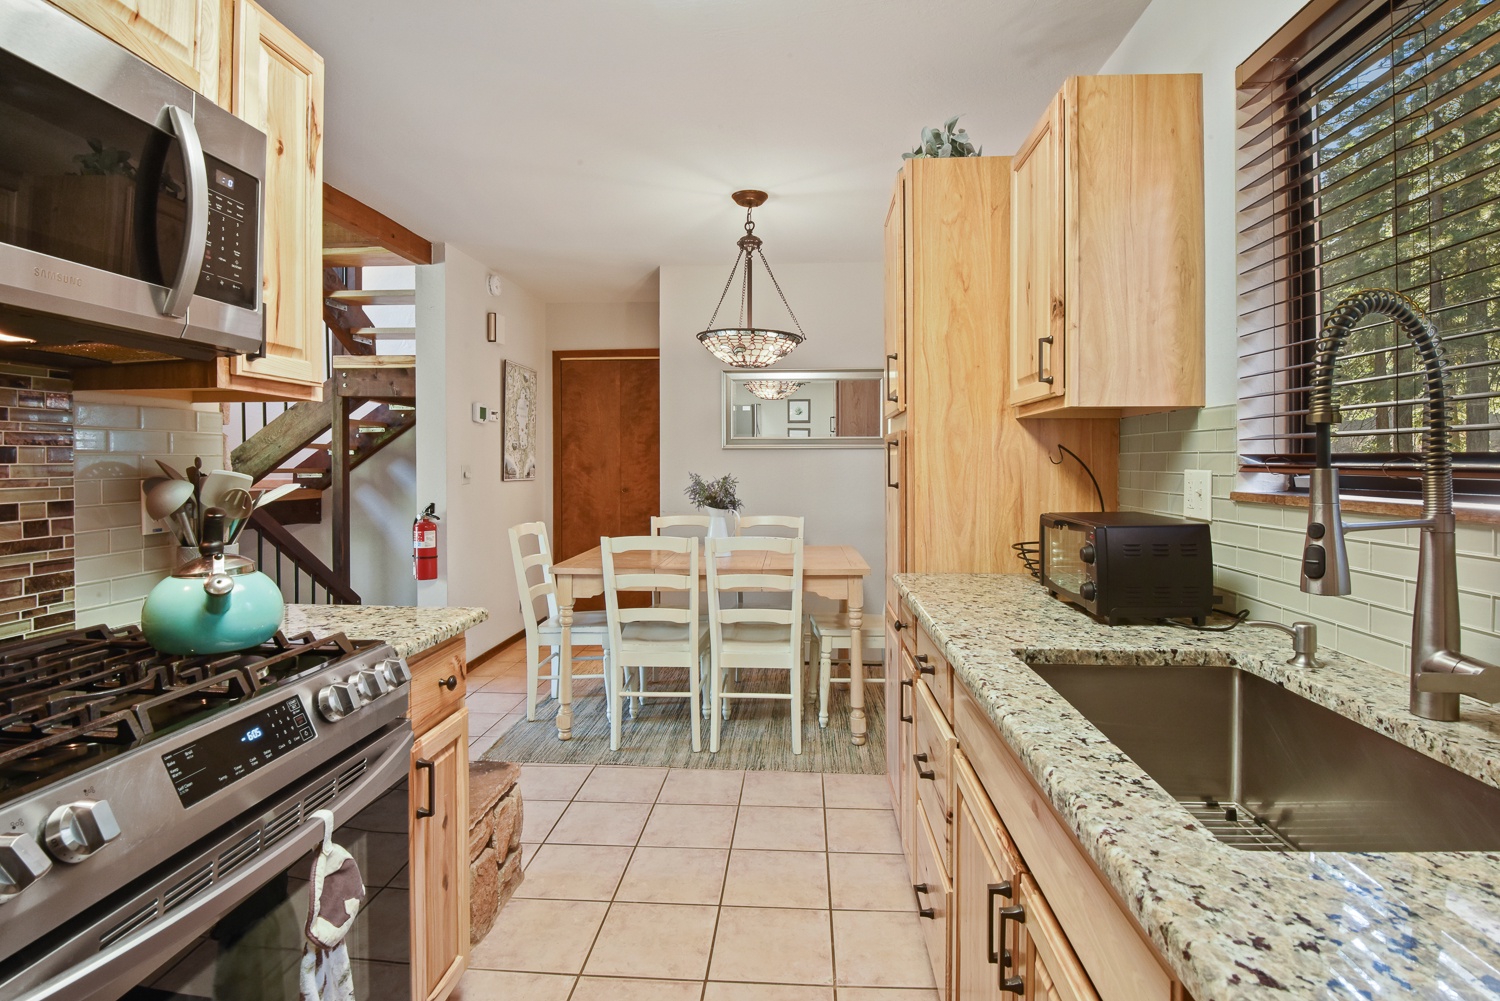 Unit #2: The updated kitchen boasts ample storage space & all the comforts of home